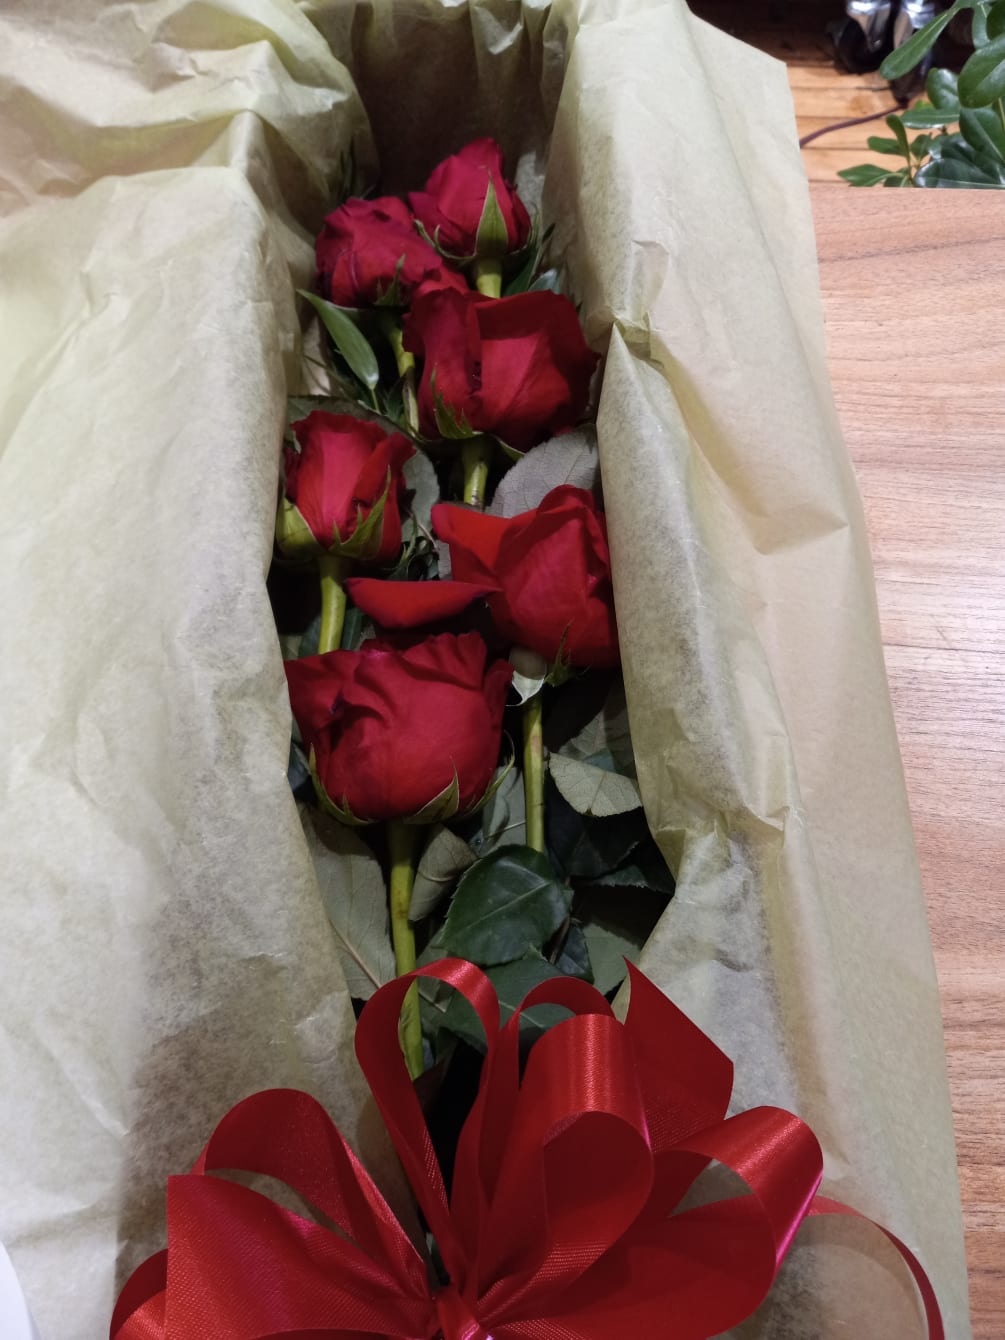 Beautiful red roses boxed with some greens and a bow.